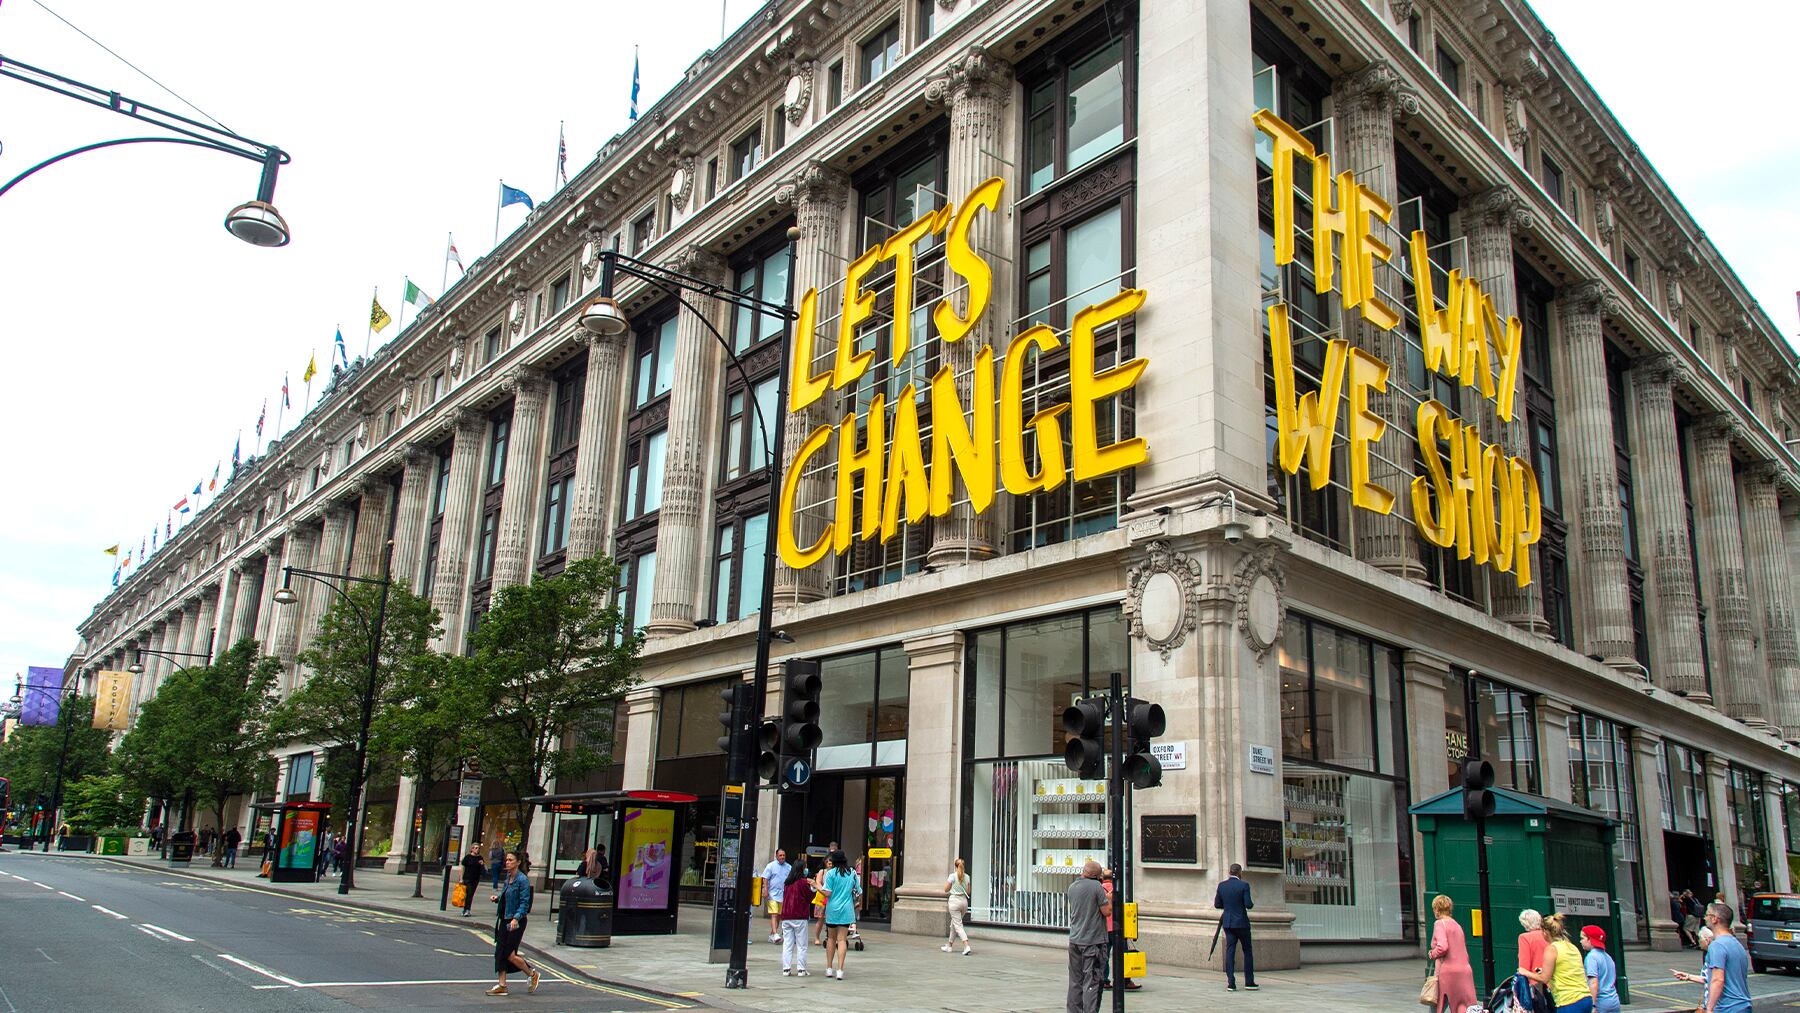 Selfridges is joining a stable of luxury department stores owned jointly by Thai retail conglomerate Central Group and Austrian property group Signa.